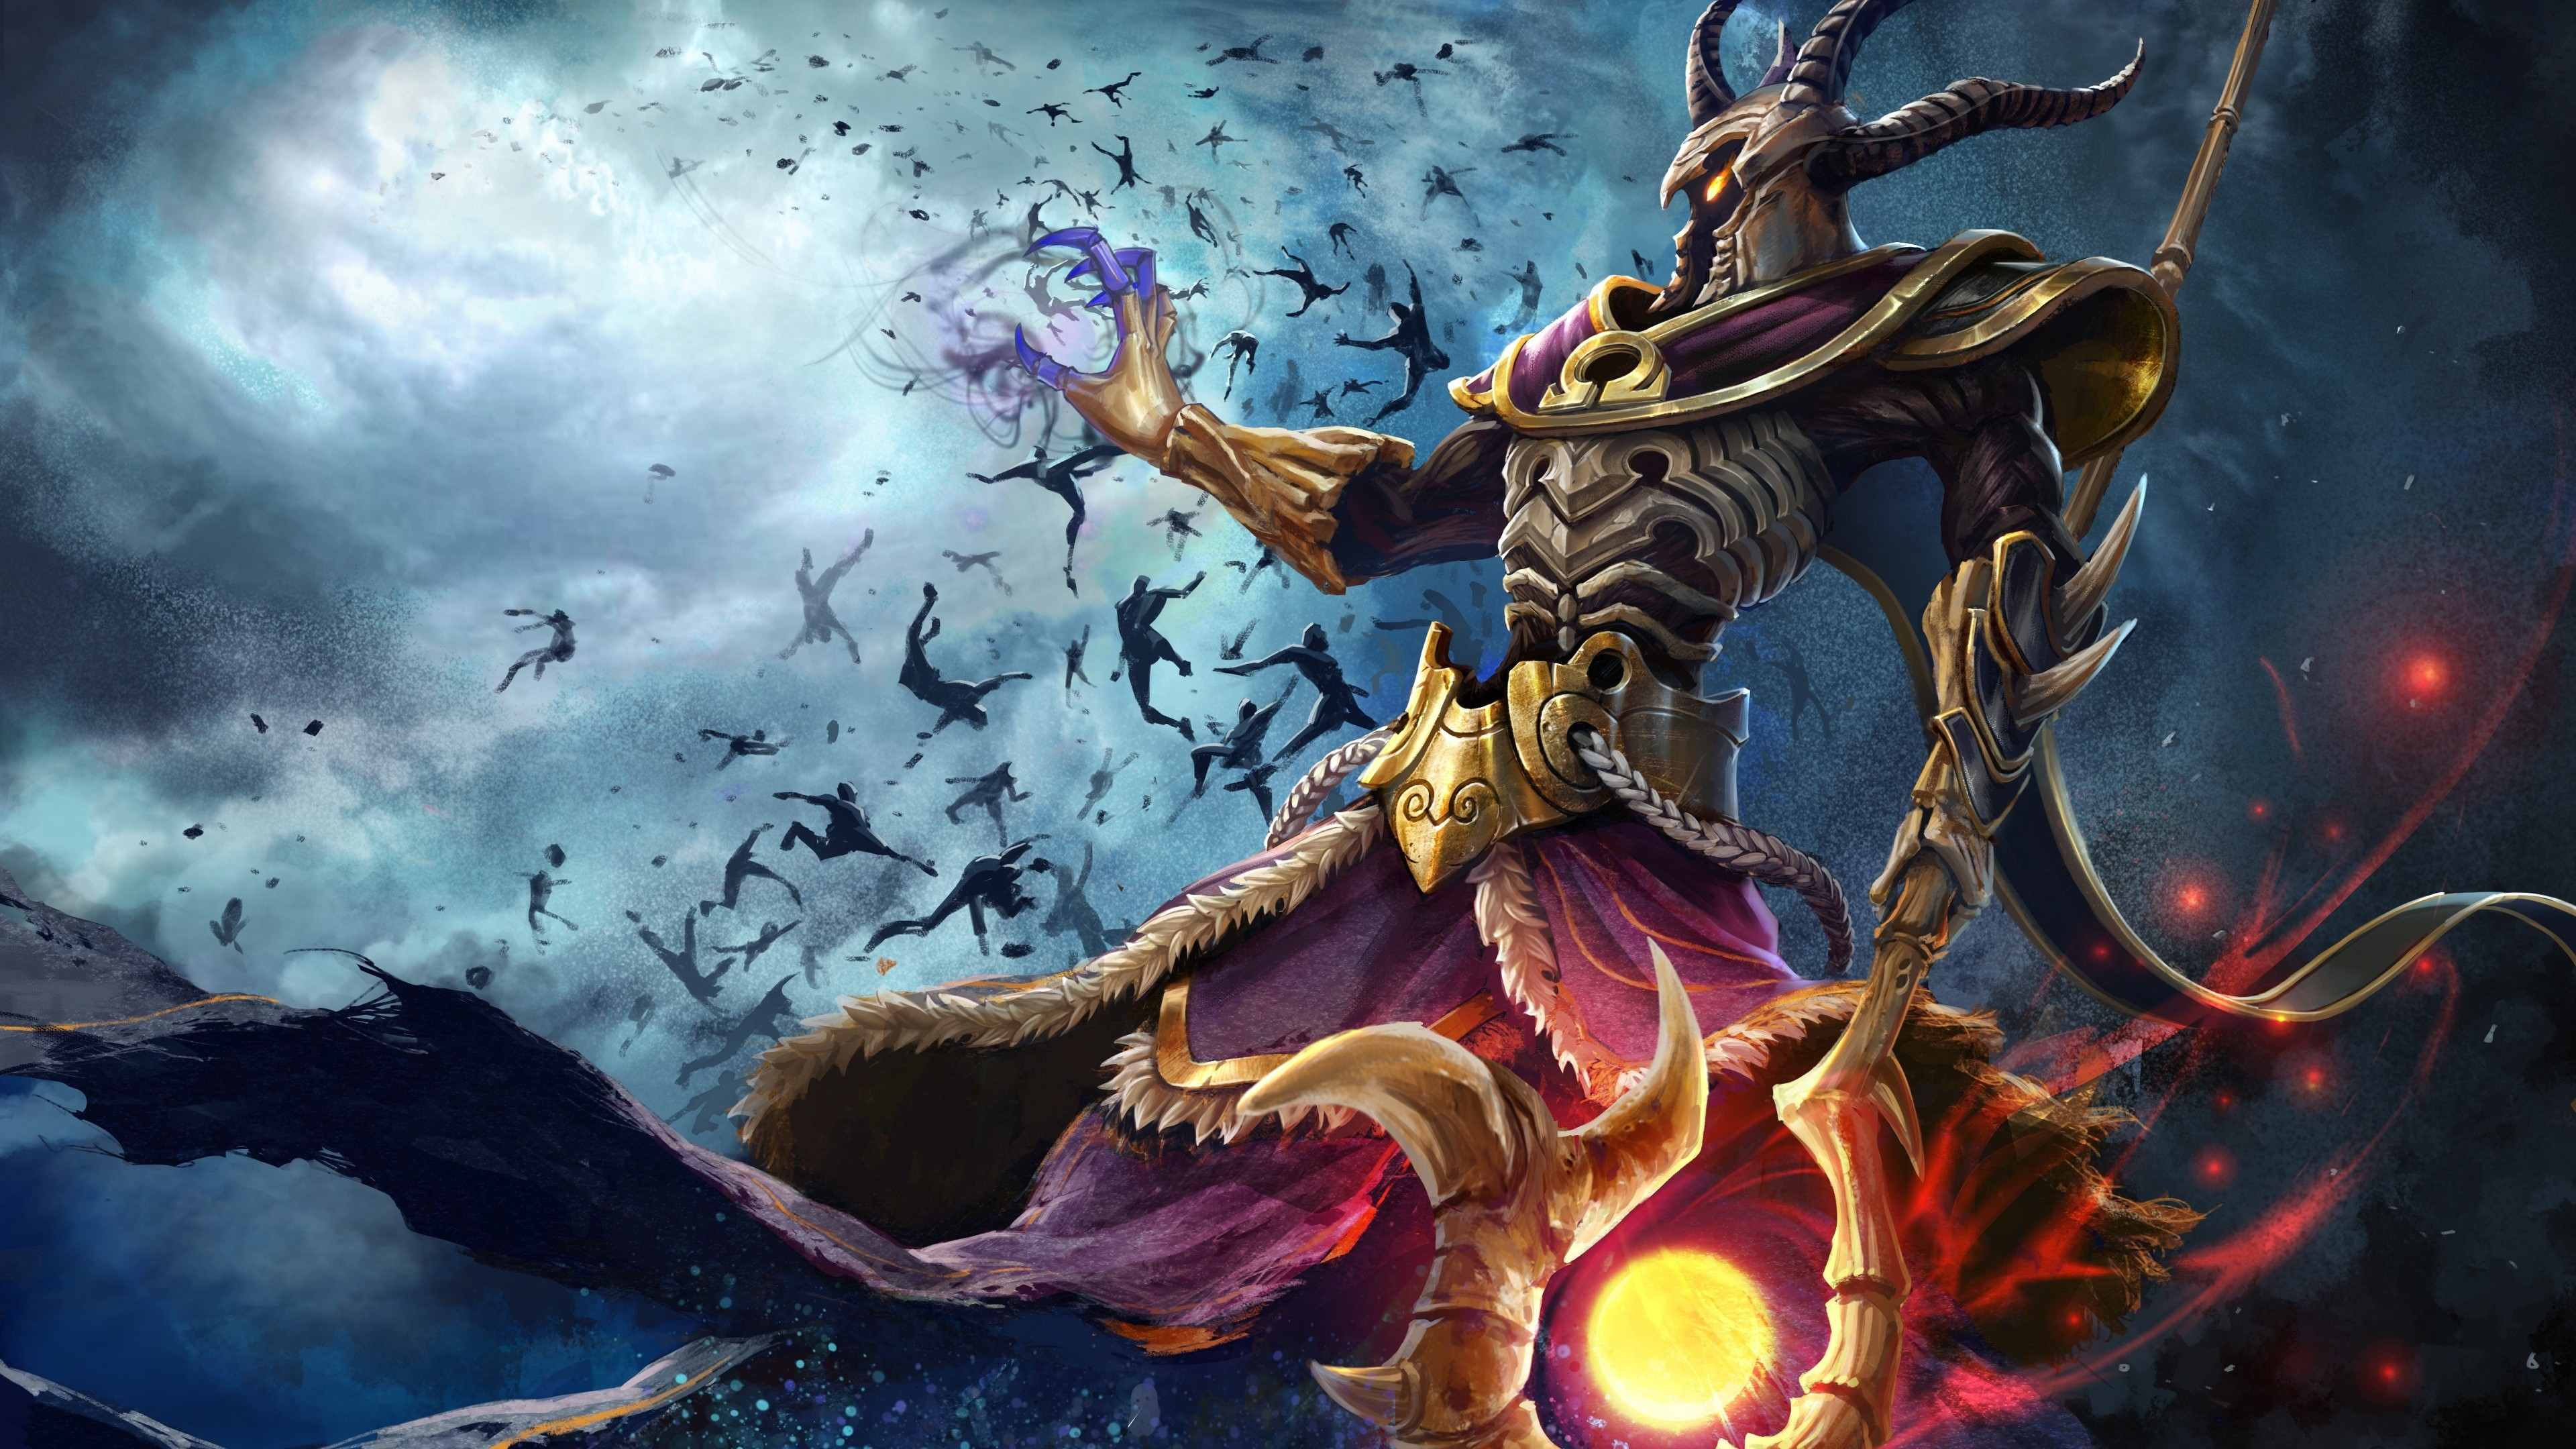 3840x2160 1100+ Smite HD Wallpapers and Backgrounds